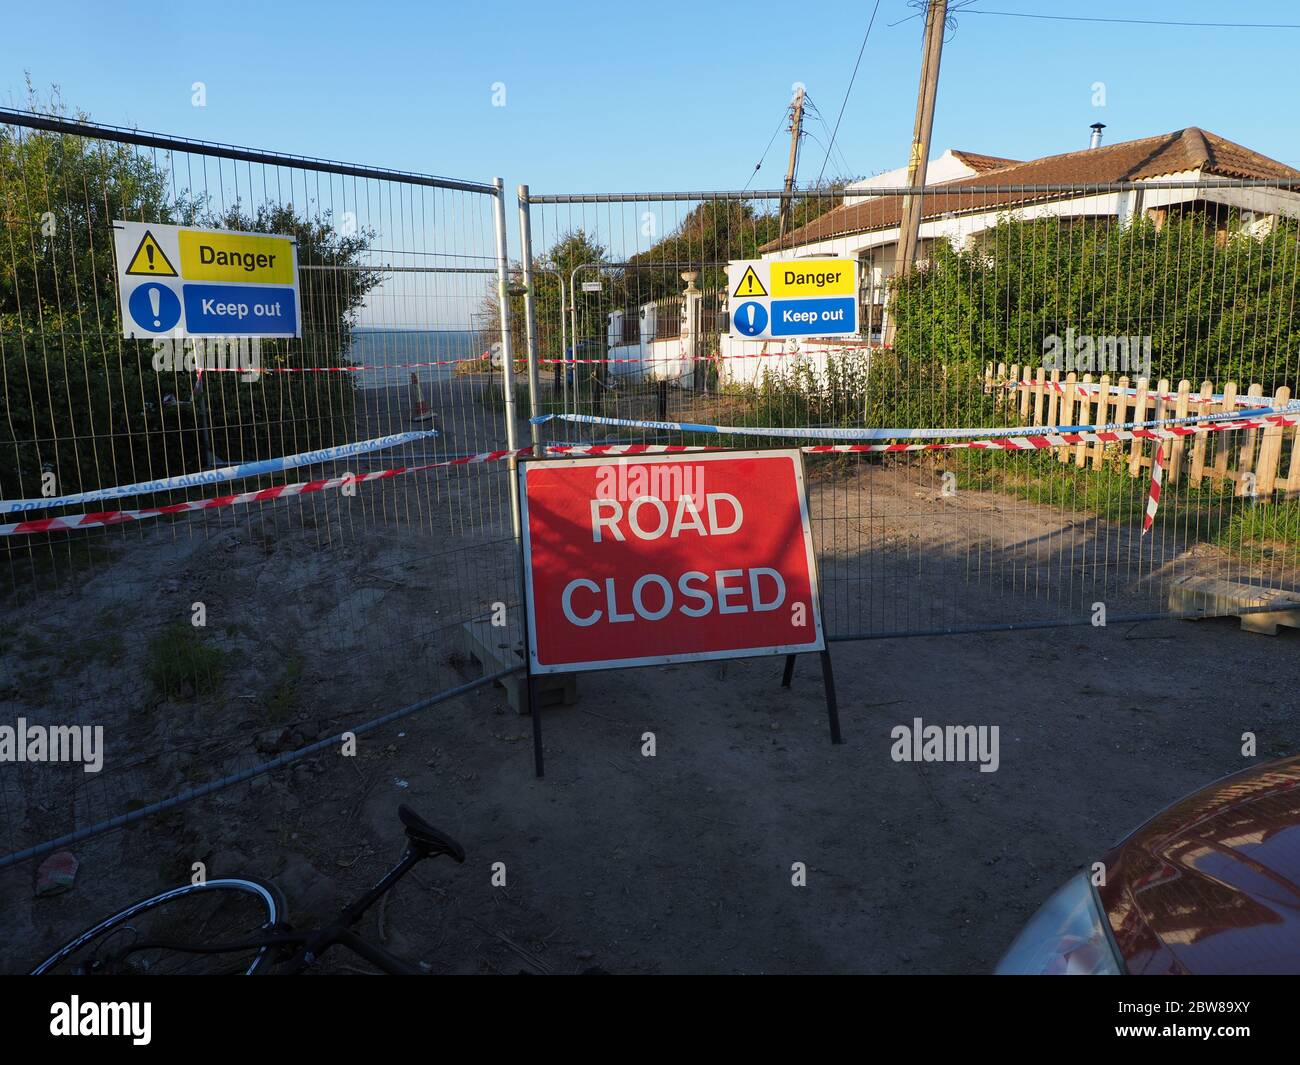 Eastchurch, Kent, UK. 30th May, 2020. Part of the Isle of Sheppey cliffs have collapsed overnight at Eastchurch, leading to the evacuation of 20 properties, with one house left perilously close to the edge - pictured. Credit: James Bell/Alamy Live News Stock Photo